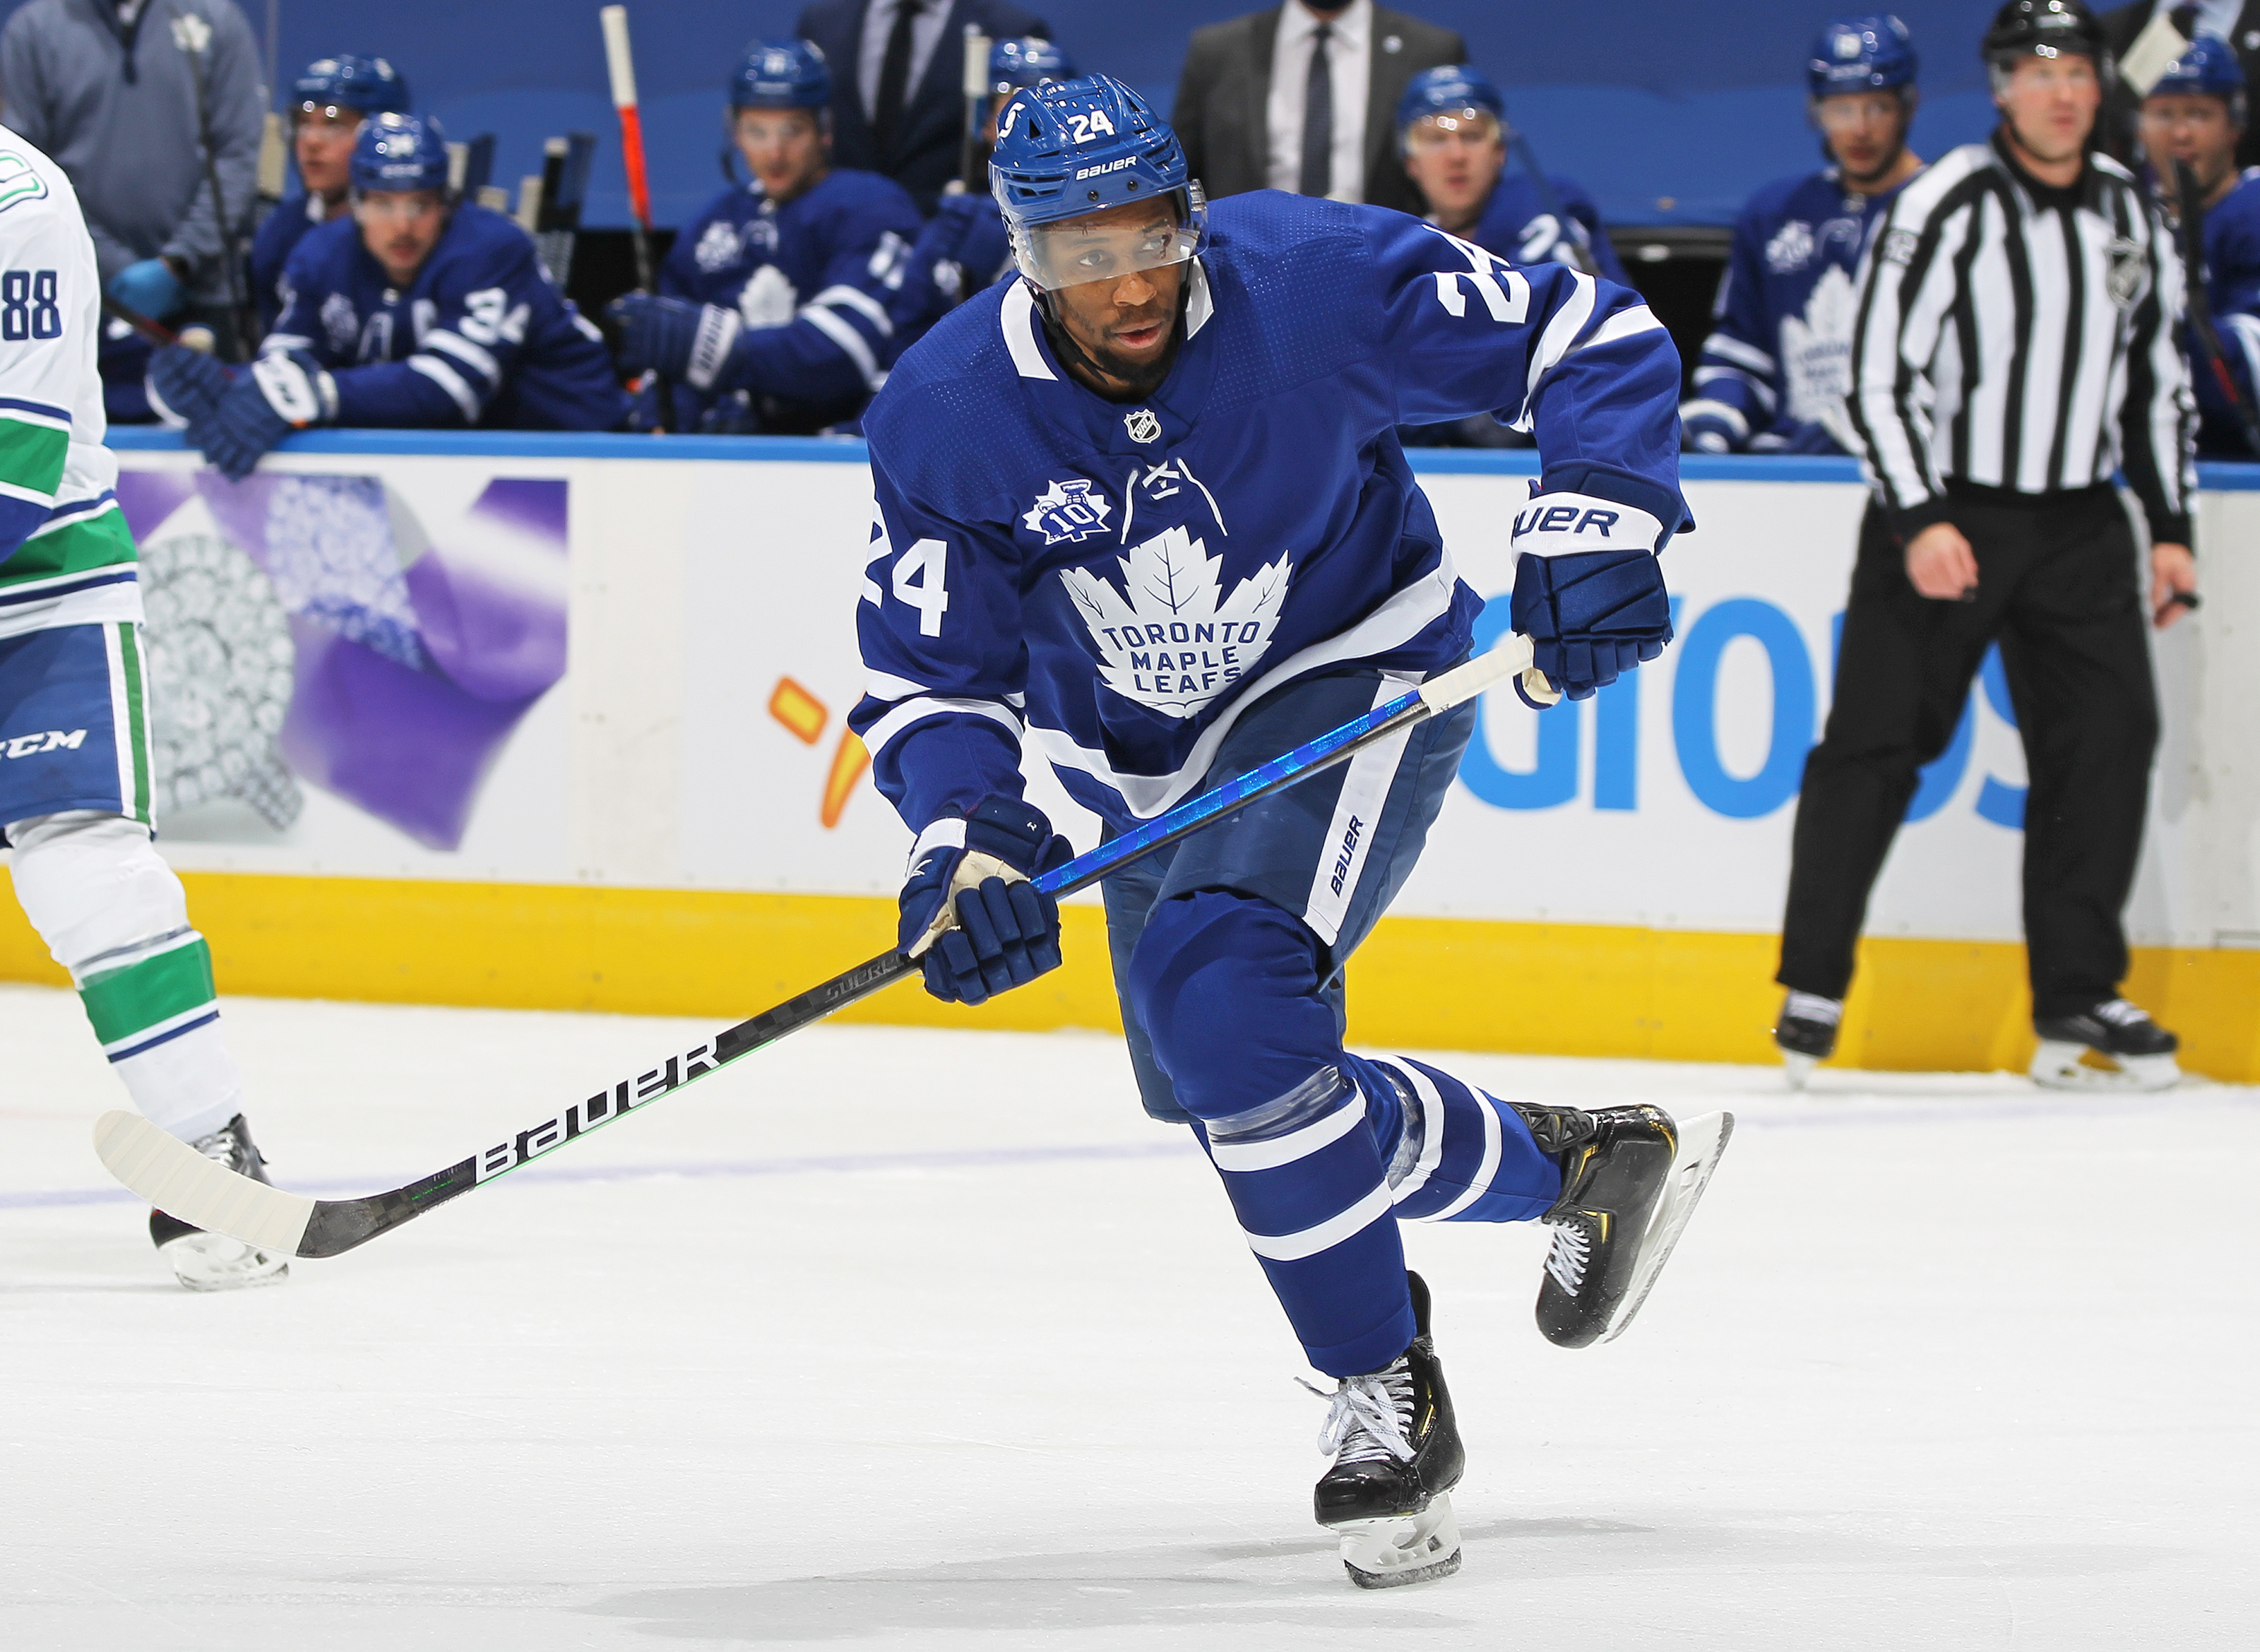 Leafs' Wayne Simmonds 'still scares the s--t out of people